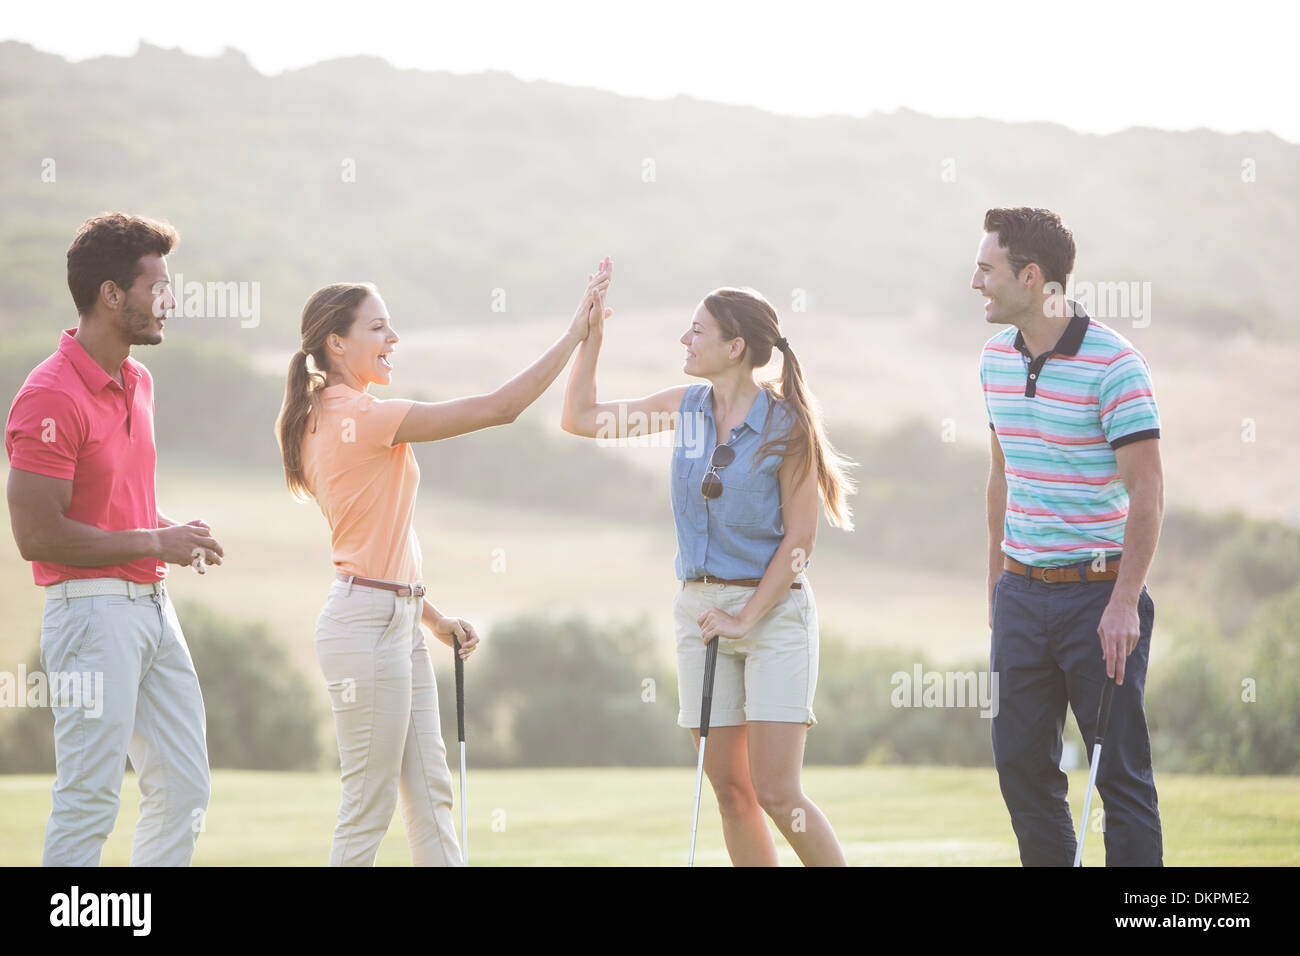 Friends high fiving on golf course Stock Photo